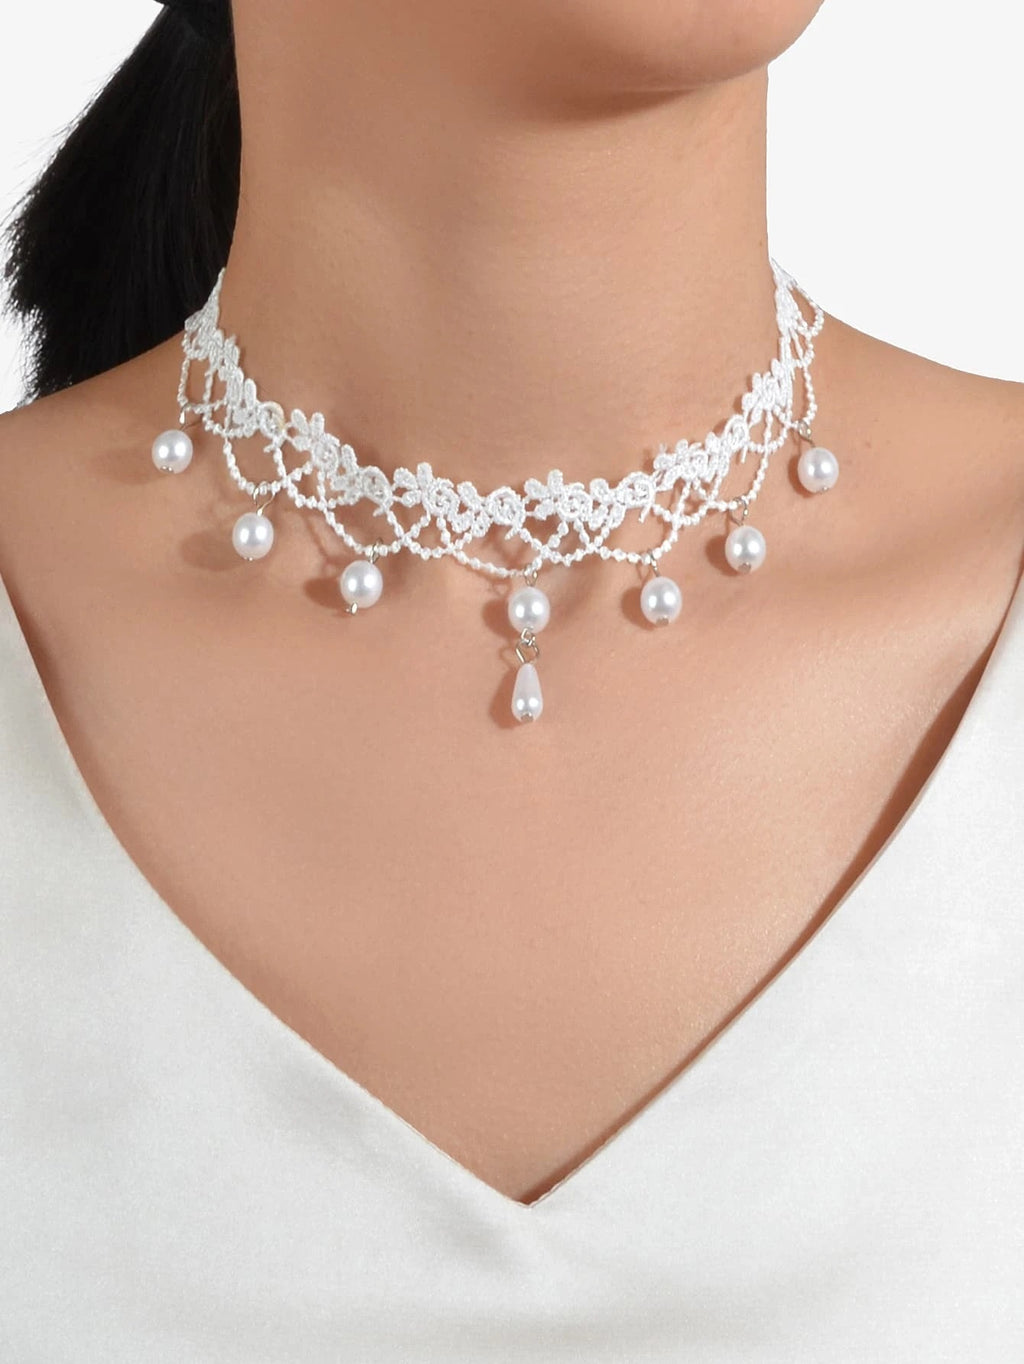 Bridal Knit Necklace, Wedding White Pearl Embroidered Scalloped Tatted Lace Choker Necklace - KaleaBoutique.com